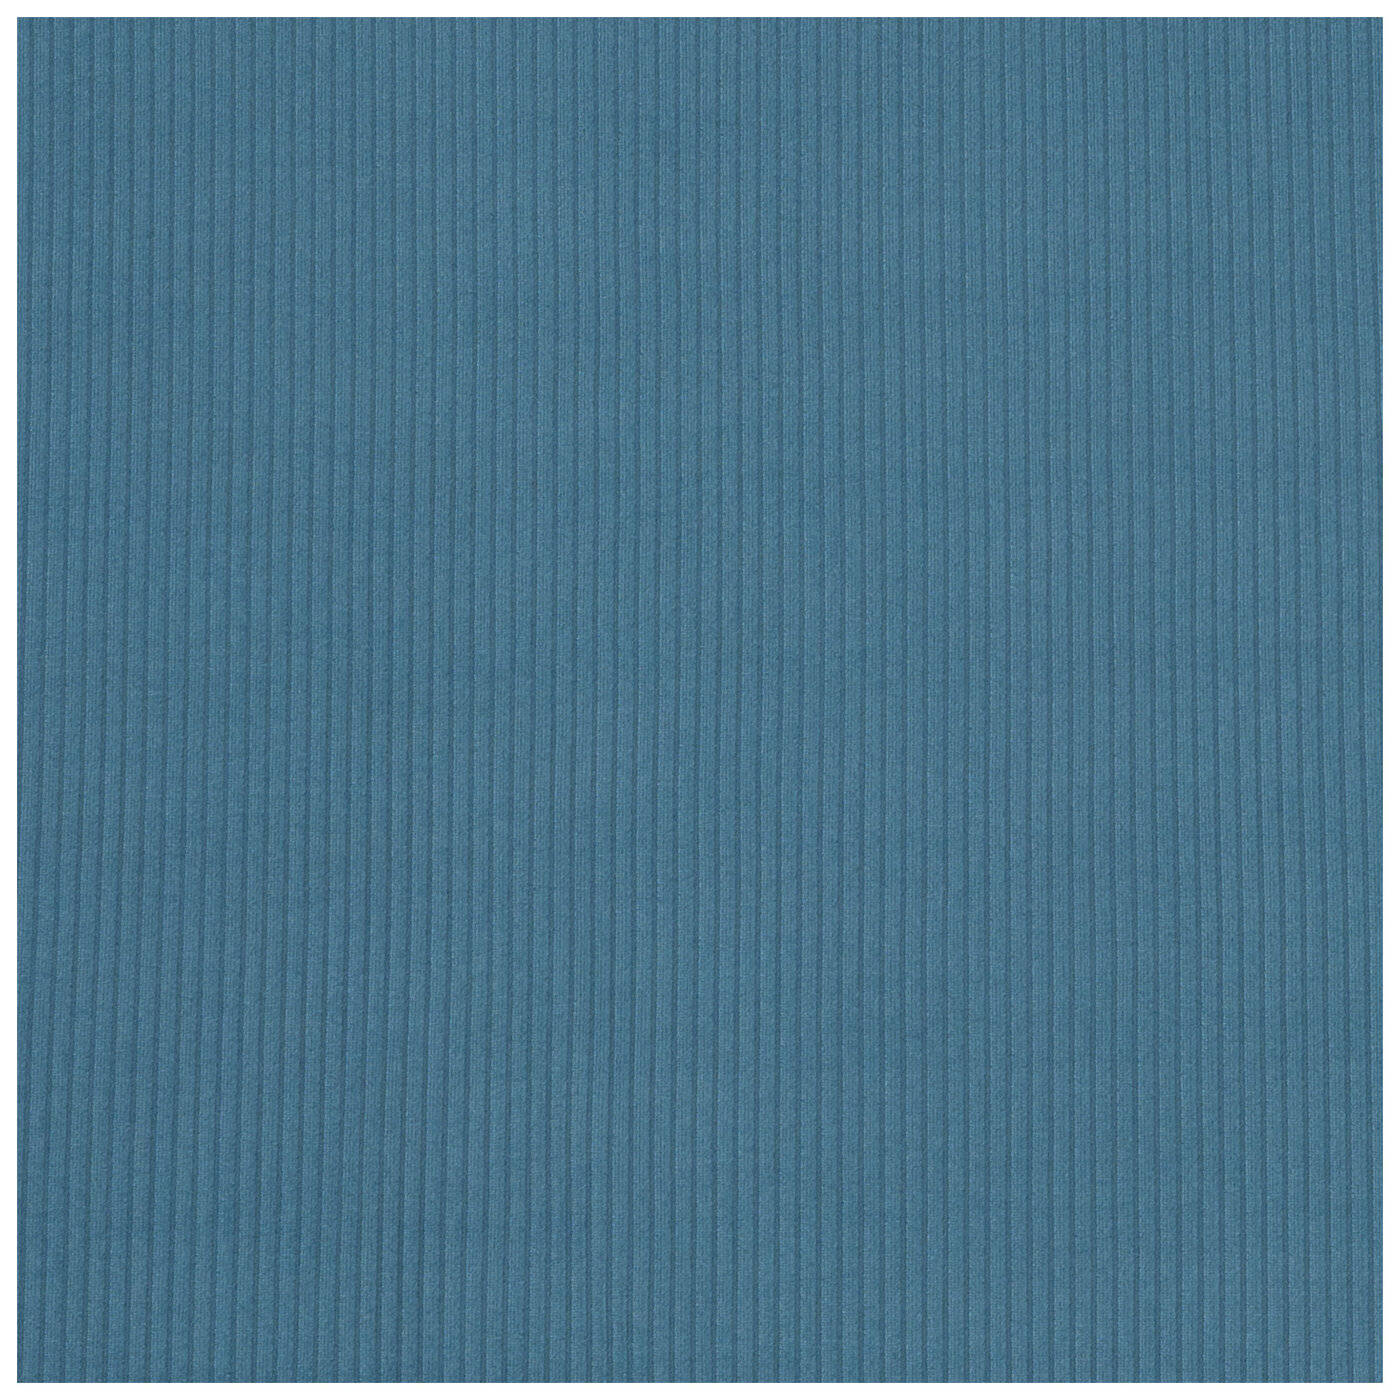 Pliable Blue Textured Fabric Wallpaper